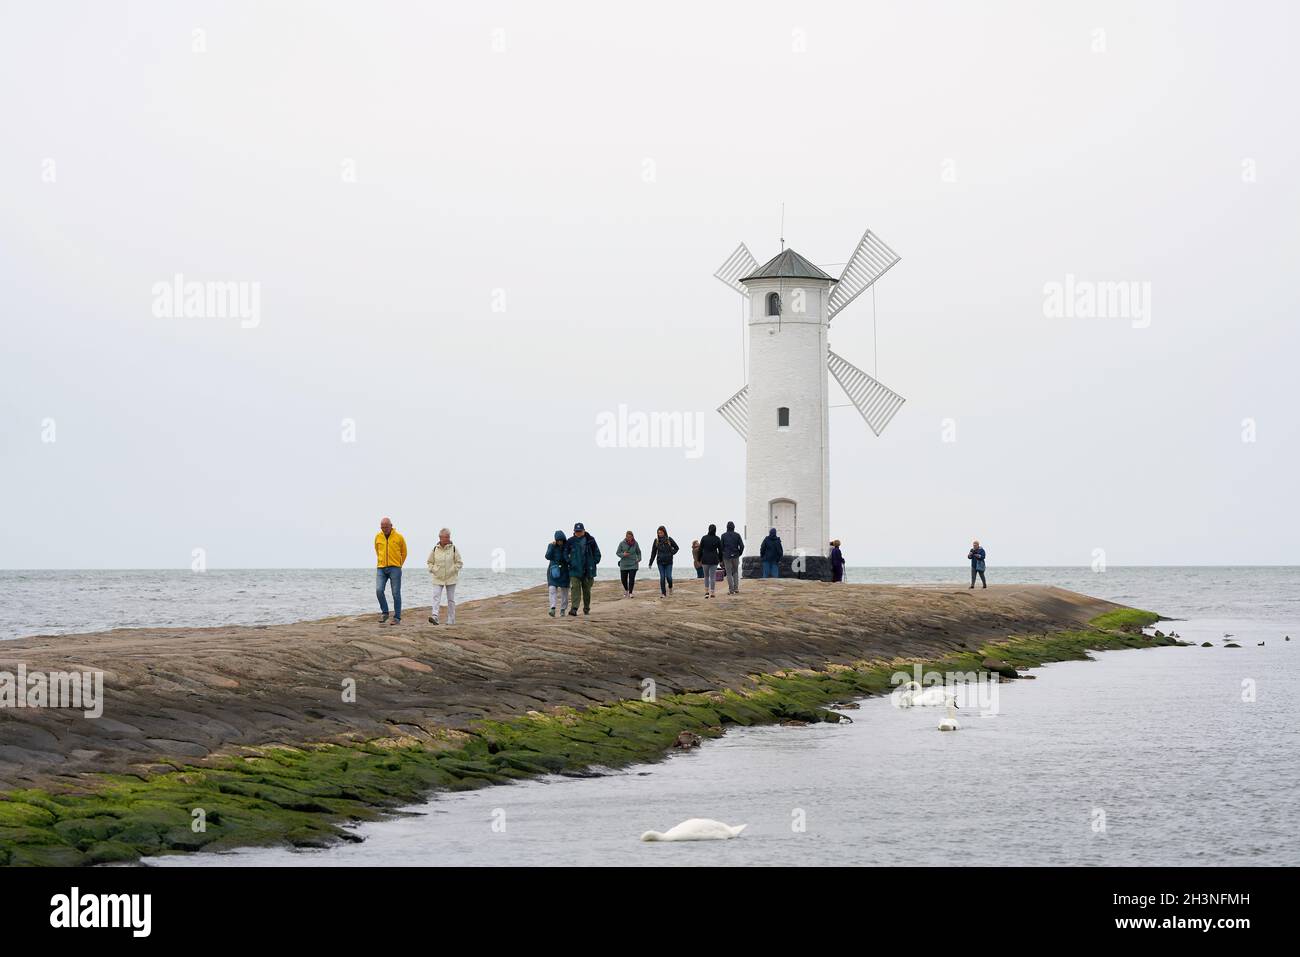 Holidaymakers at the MÃ¼hlenbake, the landmark of Swinoujscie on the Polish Baltic coast Stock Photo